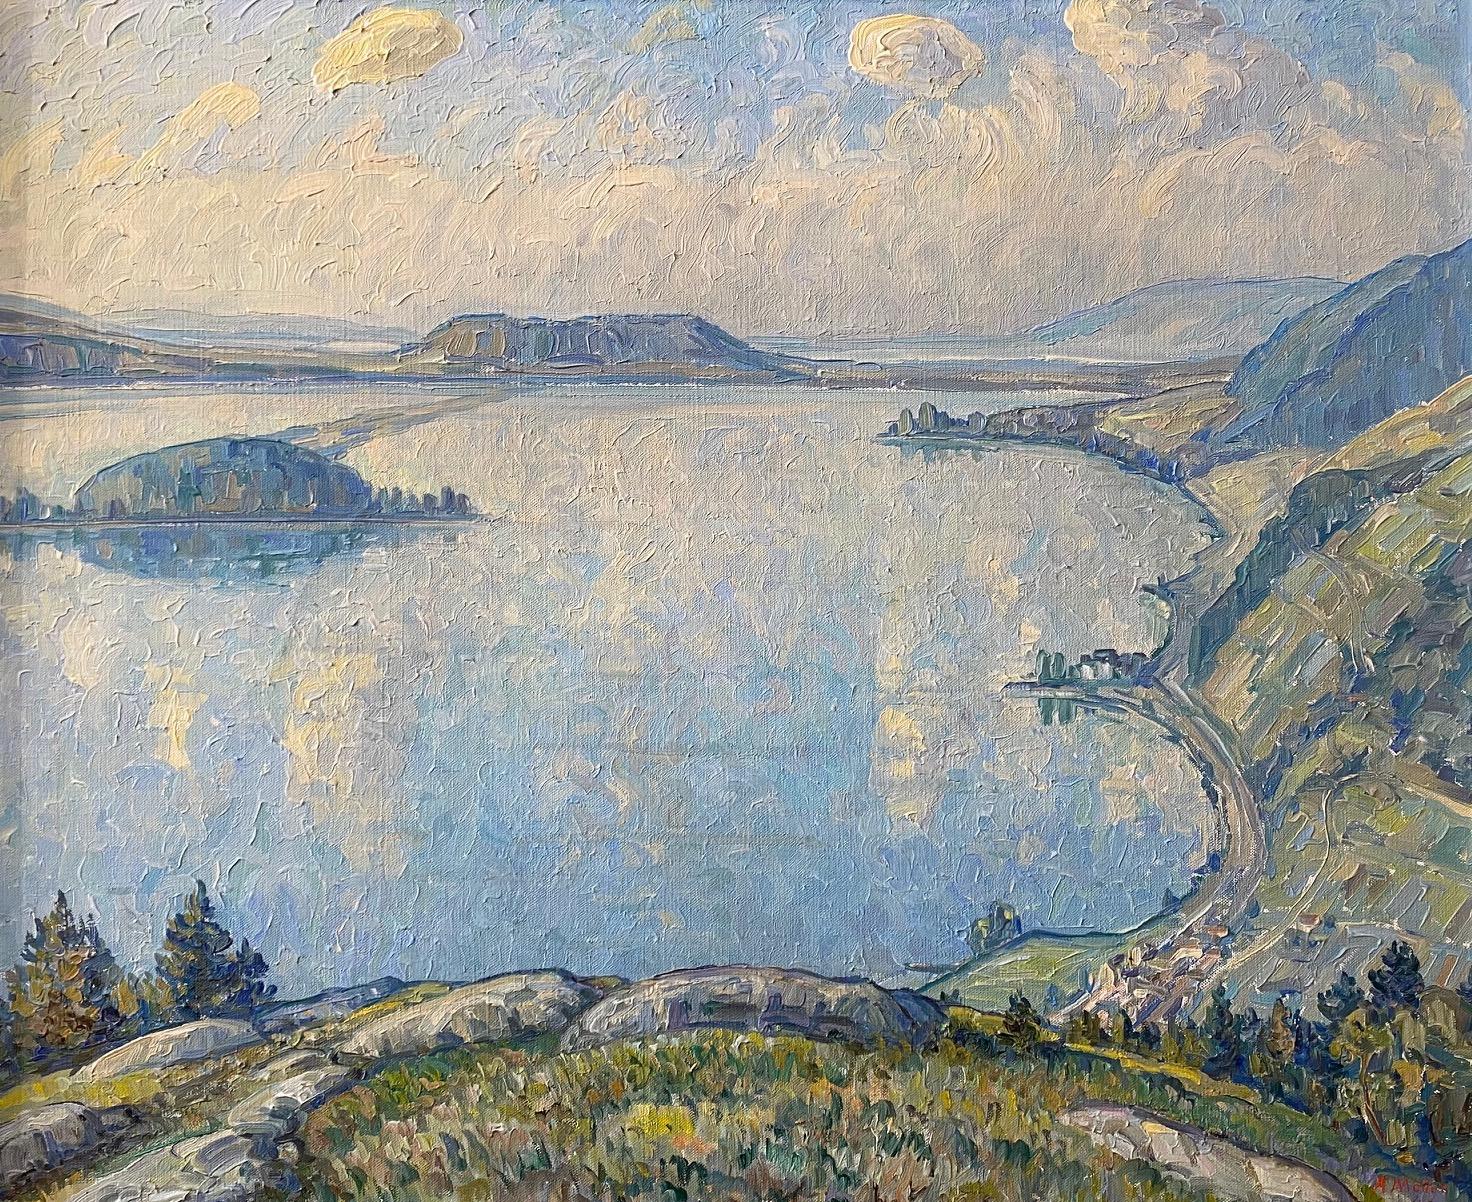 Lake view by A. Muller - Oil on canvas 60x73 cm